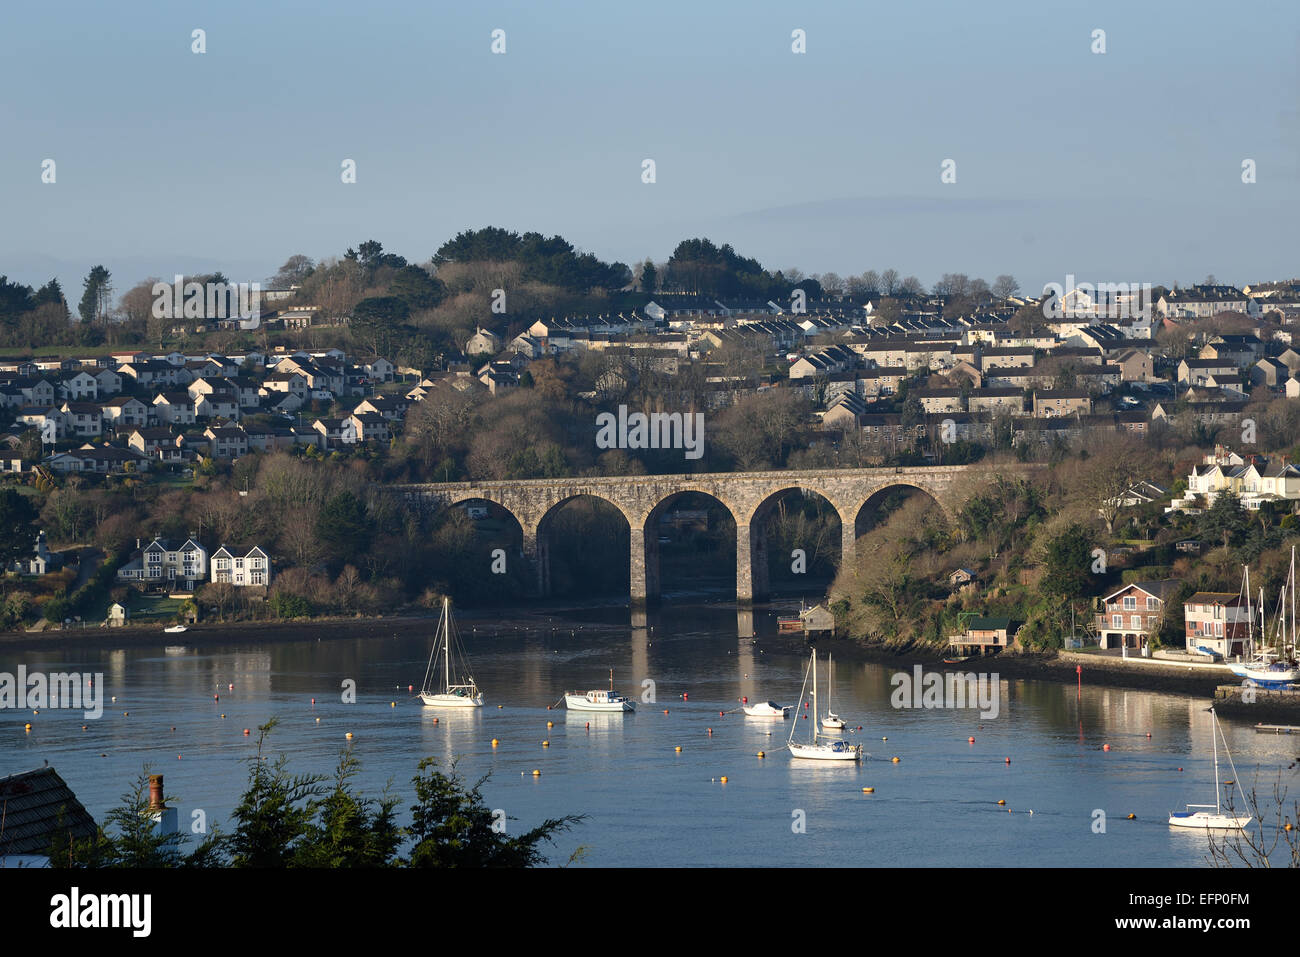 Rail bridge over a small creek at Saltash, Cornwall, UK.  Viewed across the River Tamar from St Budeaux, Plymouth. Stock Photo